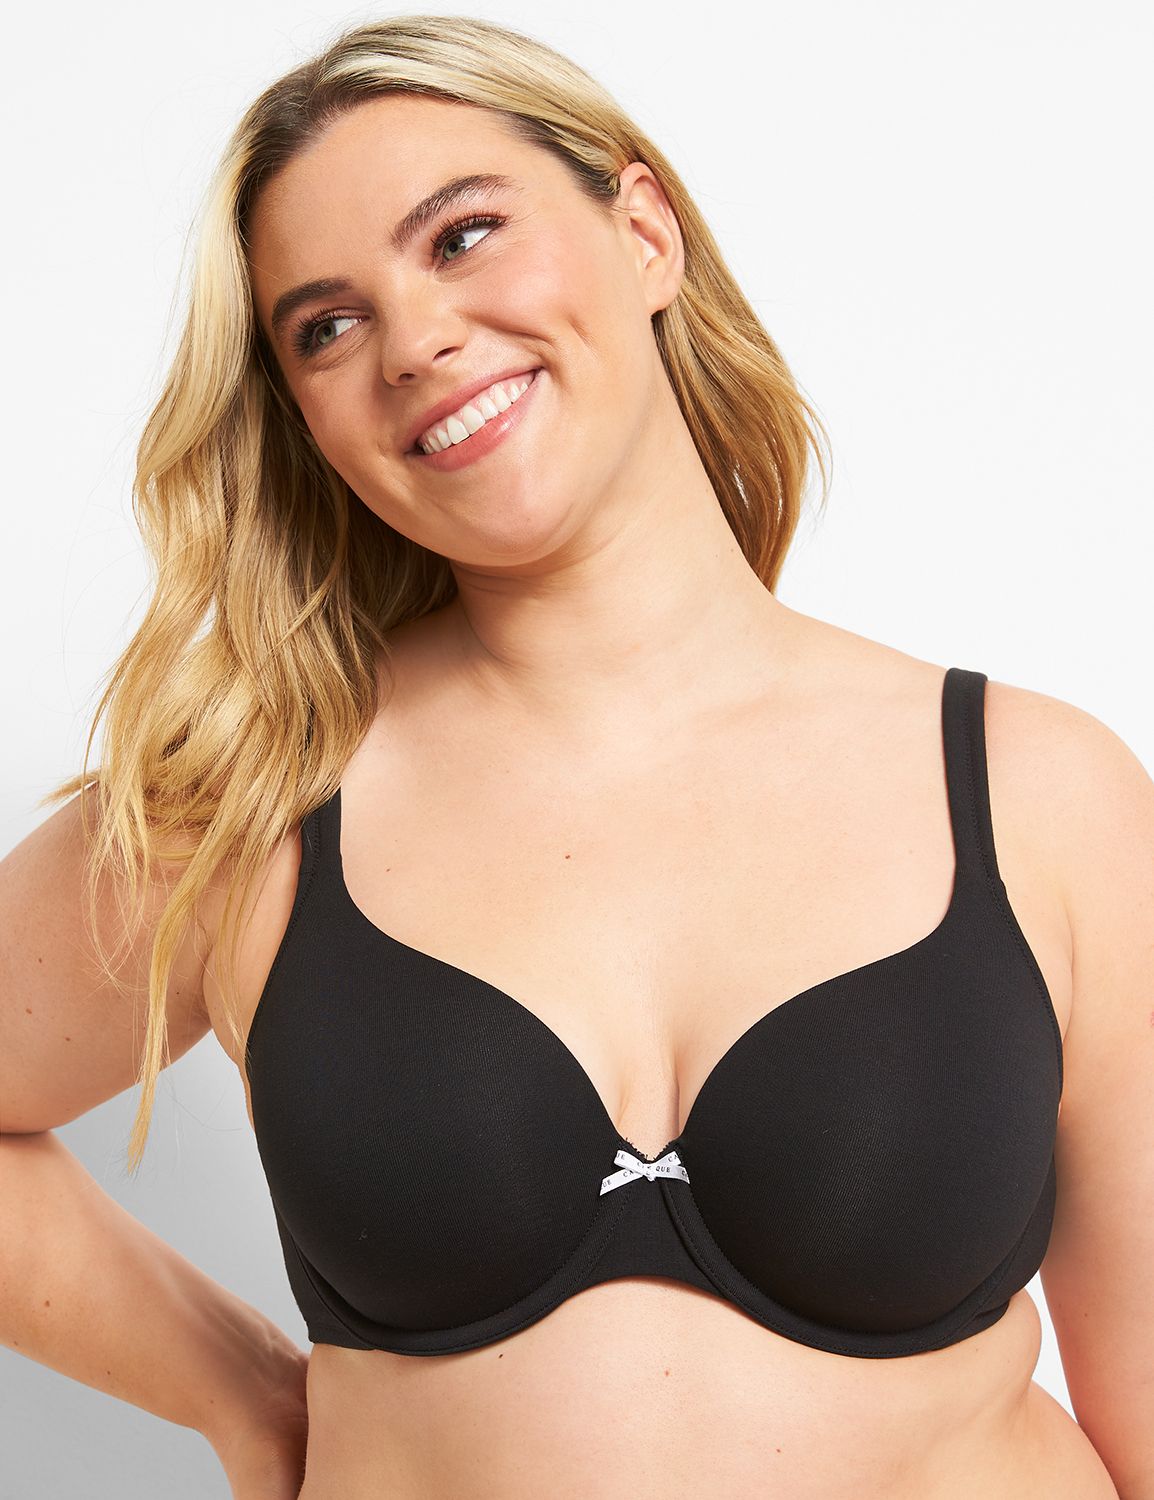 Cacique Bra T shirt Lightly Lined Black Smooth Underwire Lane Bryant 42F